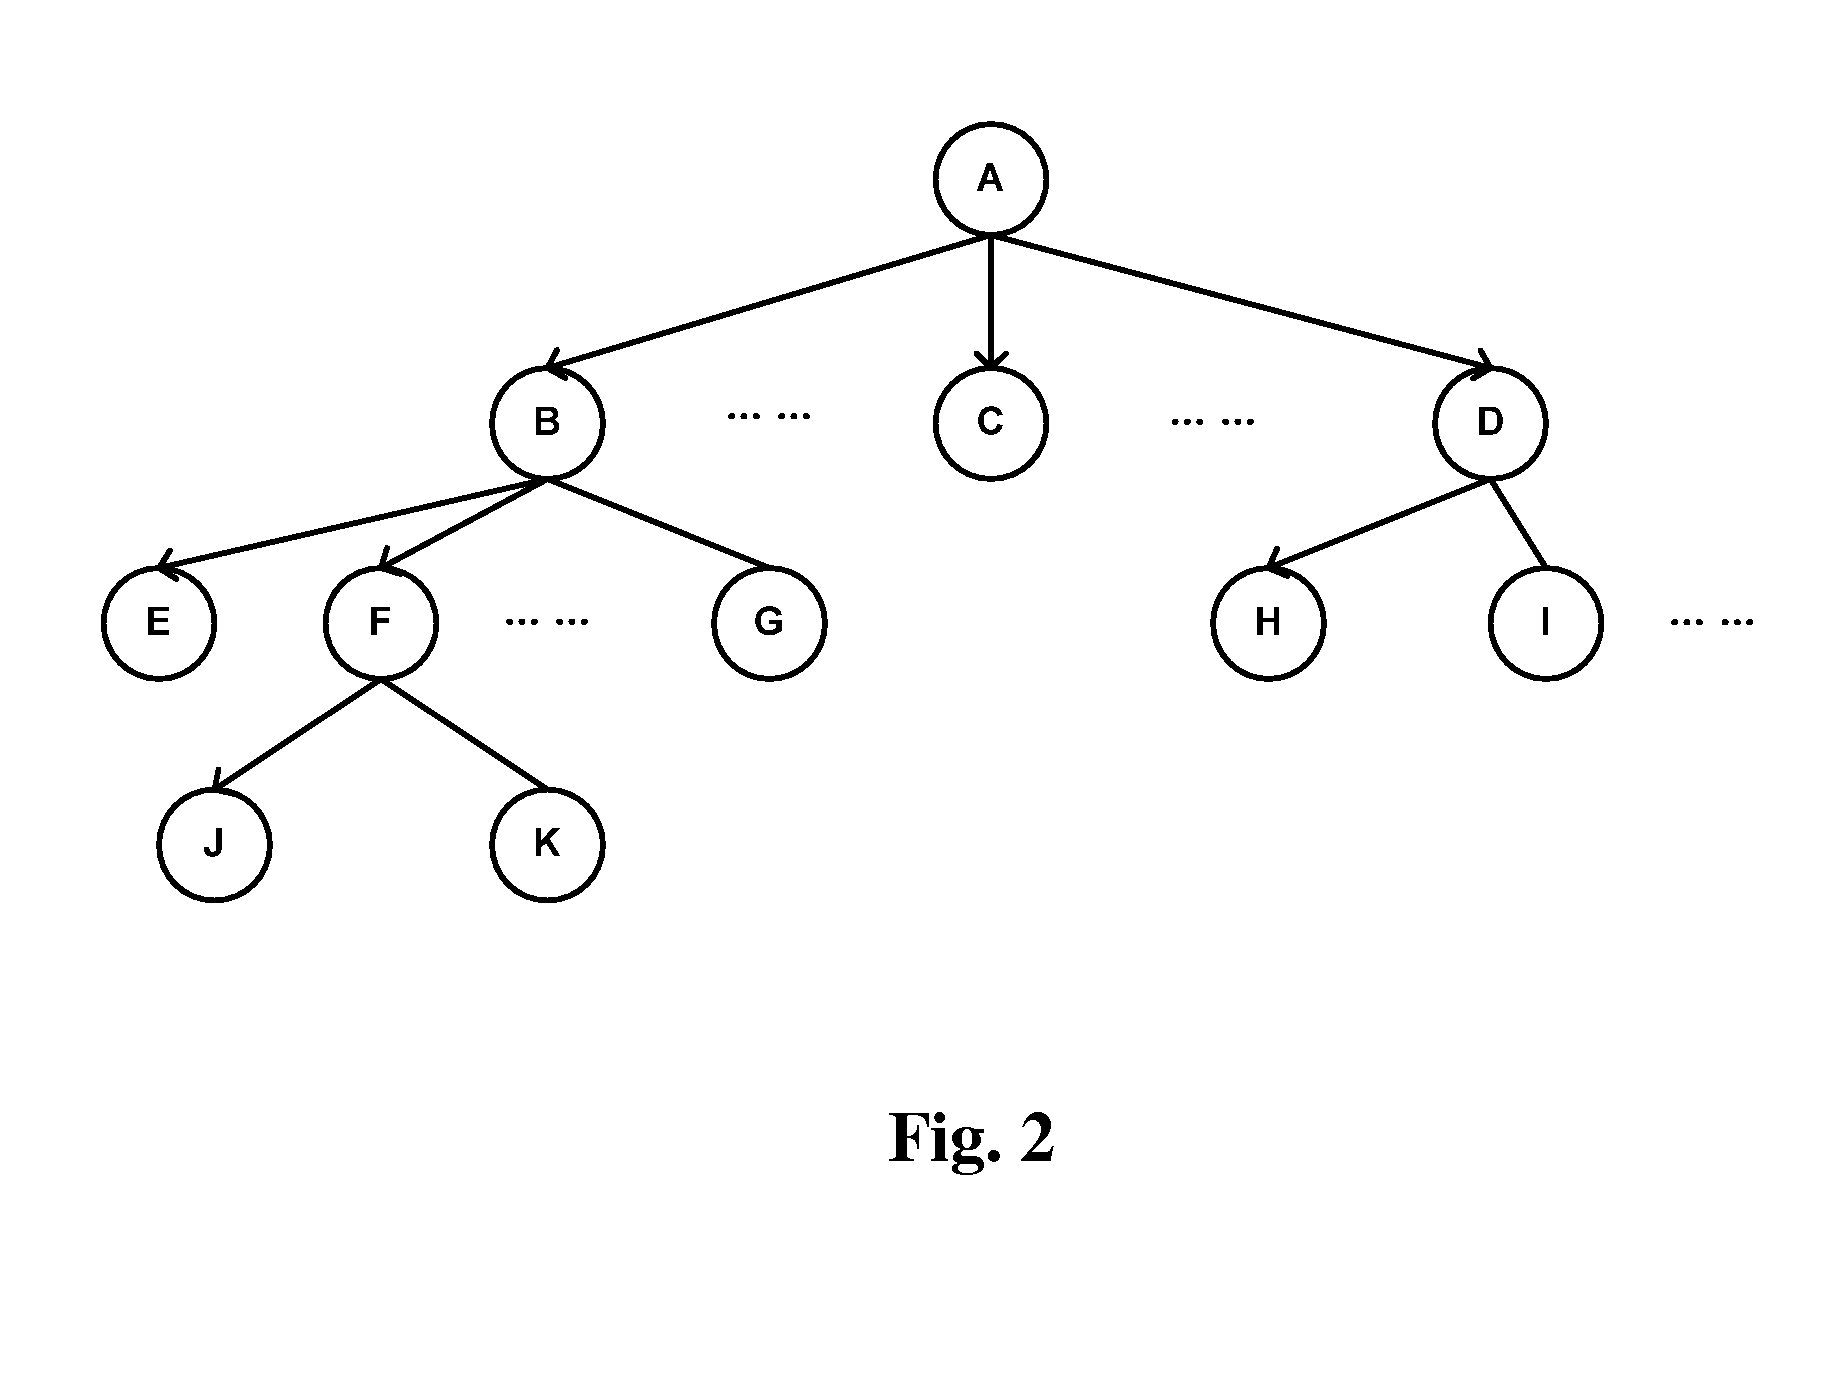 Search Ranking Method for File System and Related Search Engine